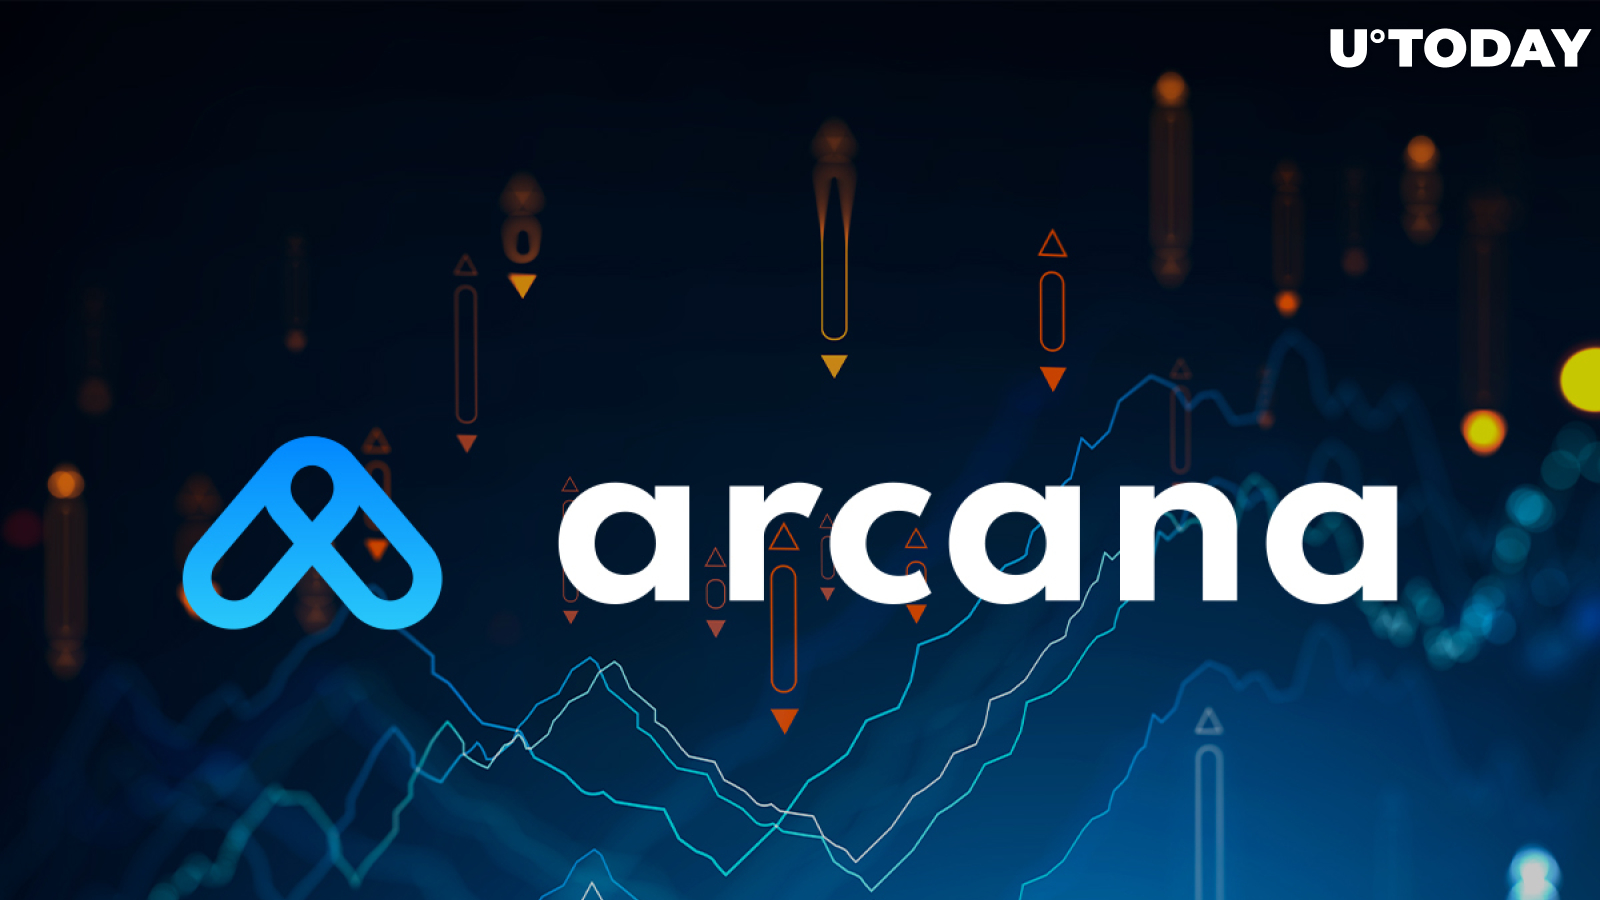 Developer-Friendly Data Privacy Platform Arcana Completes $2.3M Strategic Fundraise Backed by Tier-one Investors